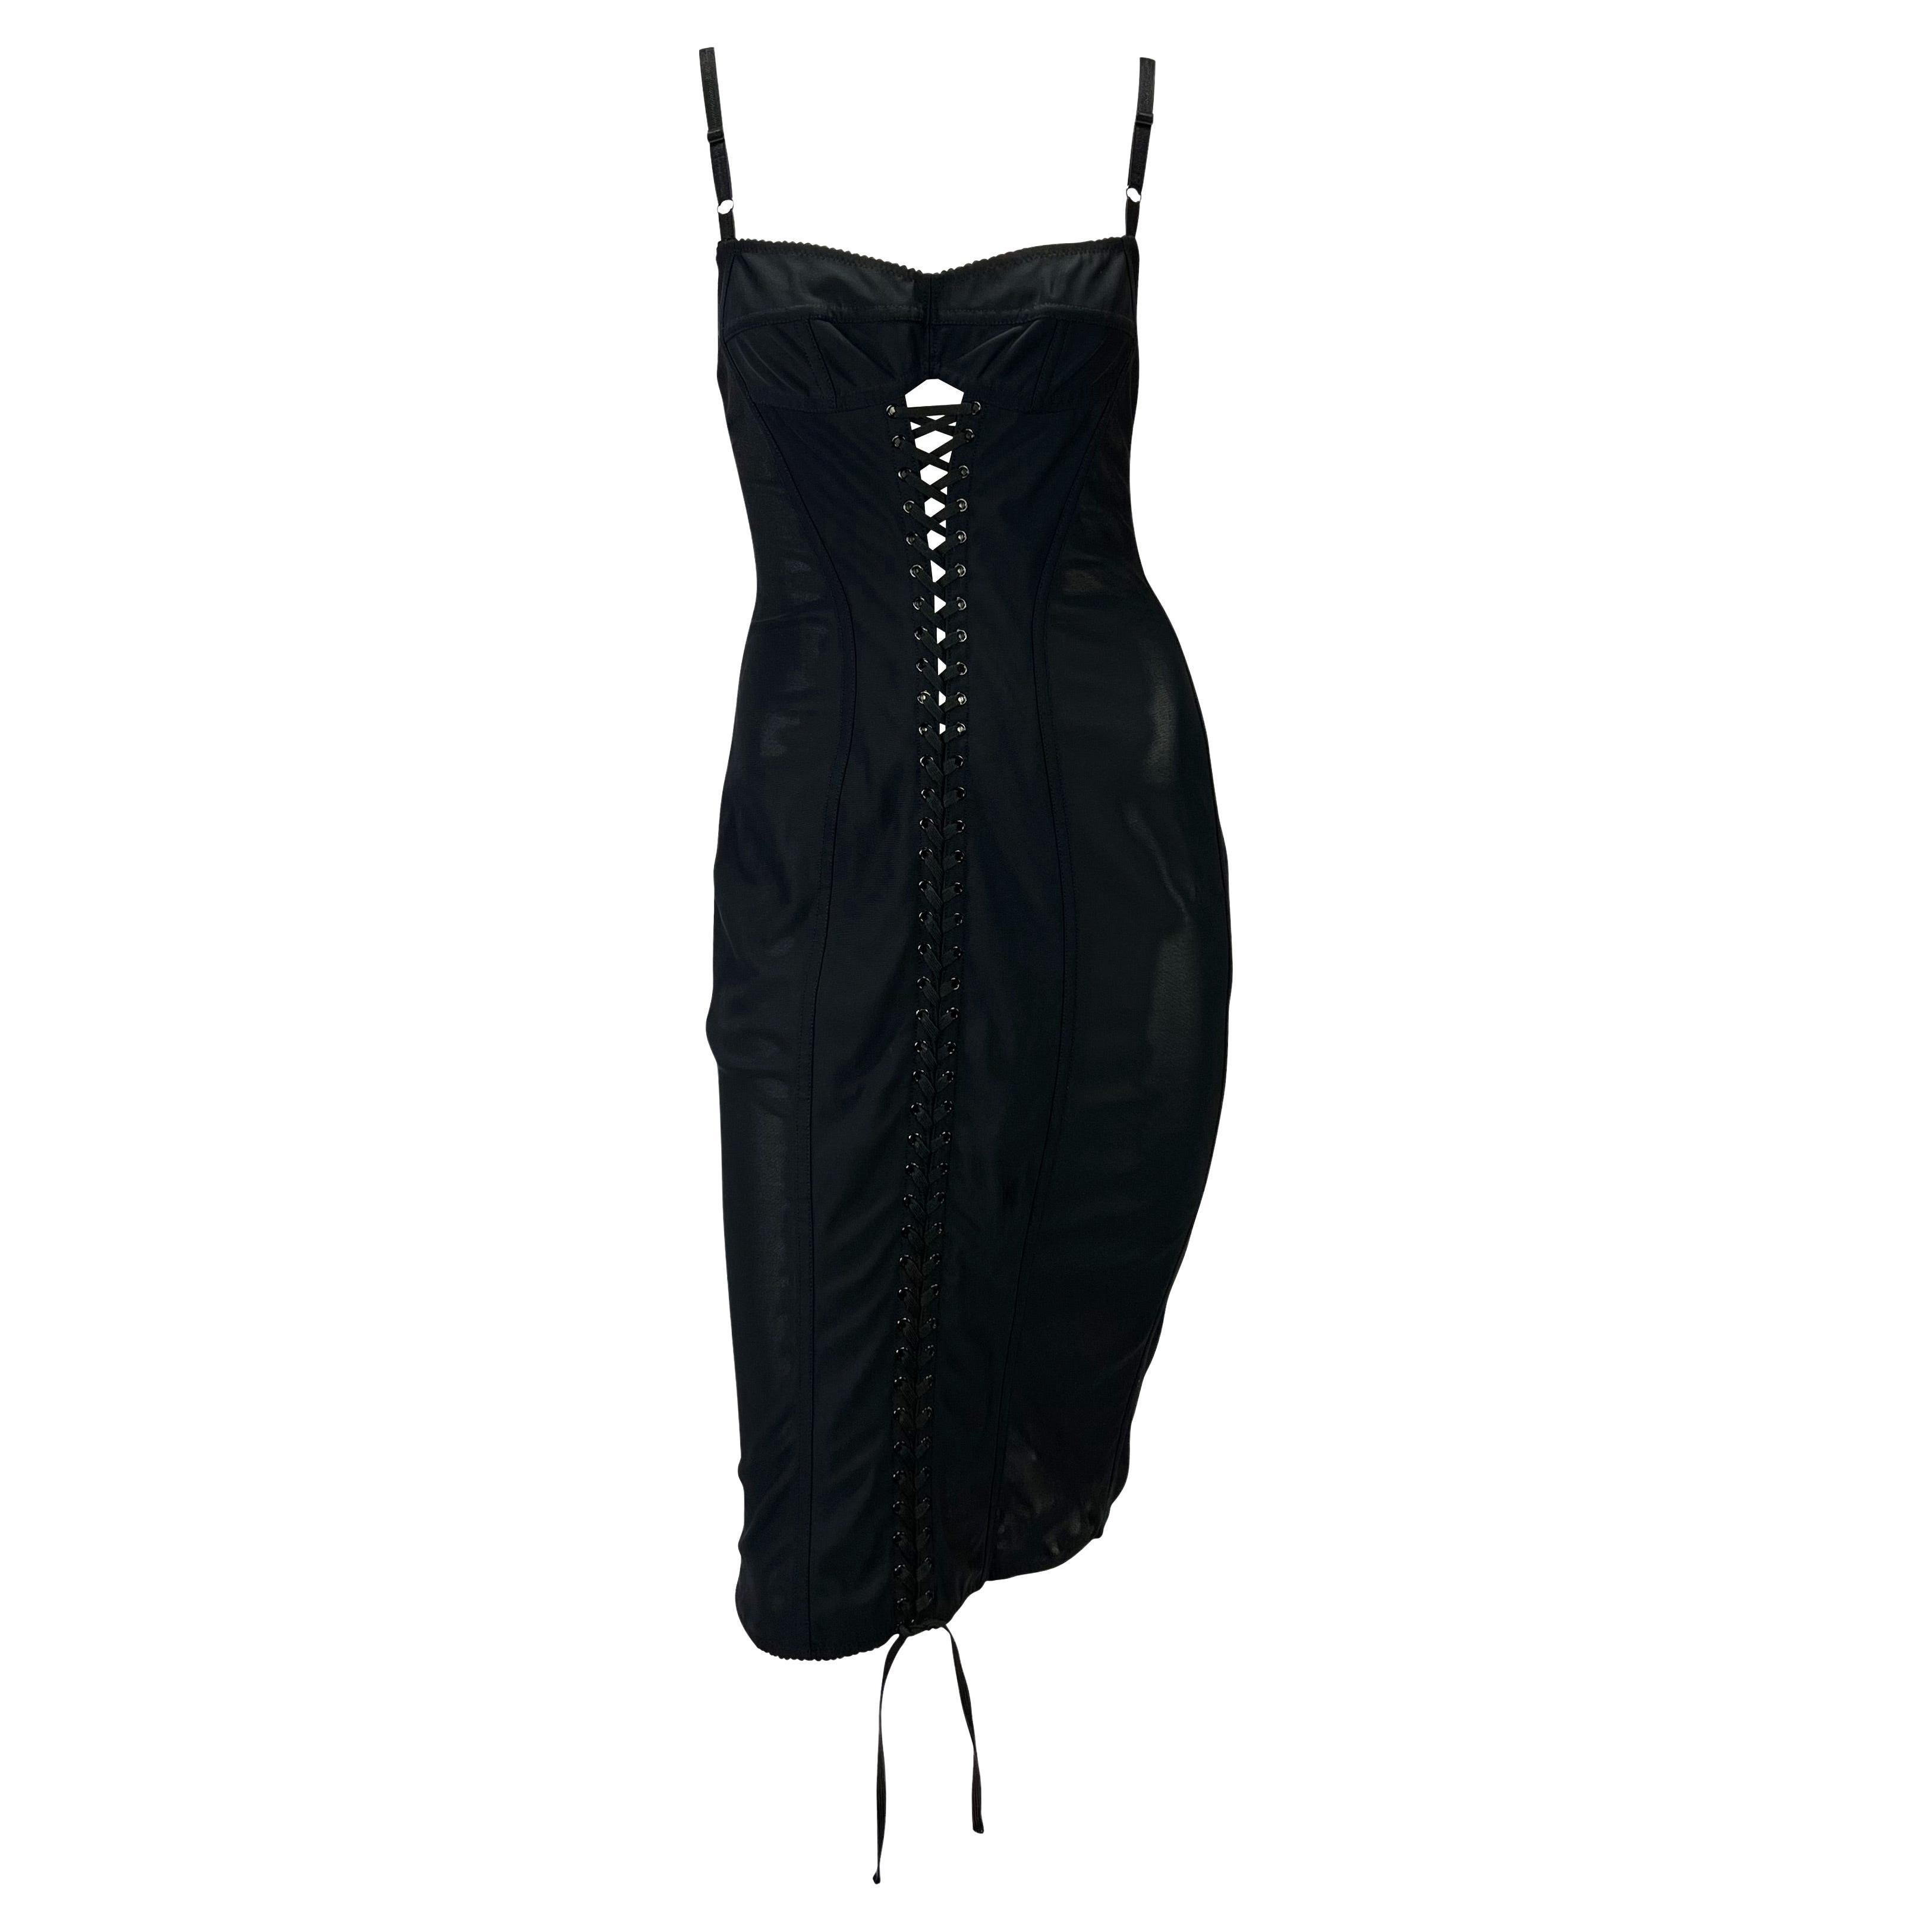 1990s Dolce & Gabbana Lace-Up Sheer Bustier Black Corset Dress For Sale